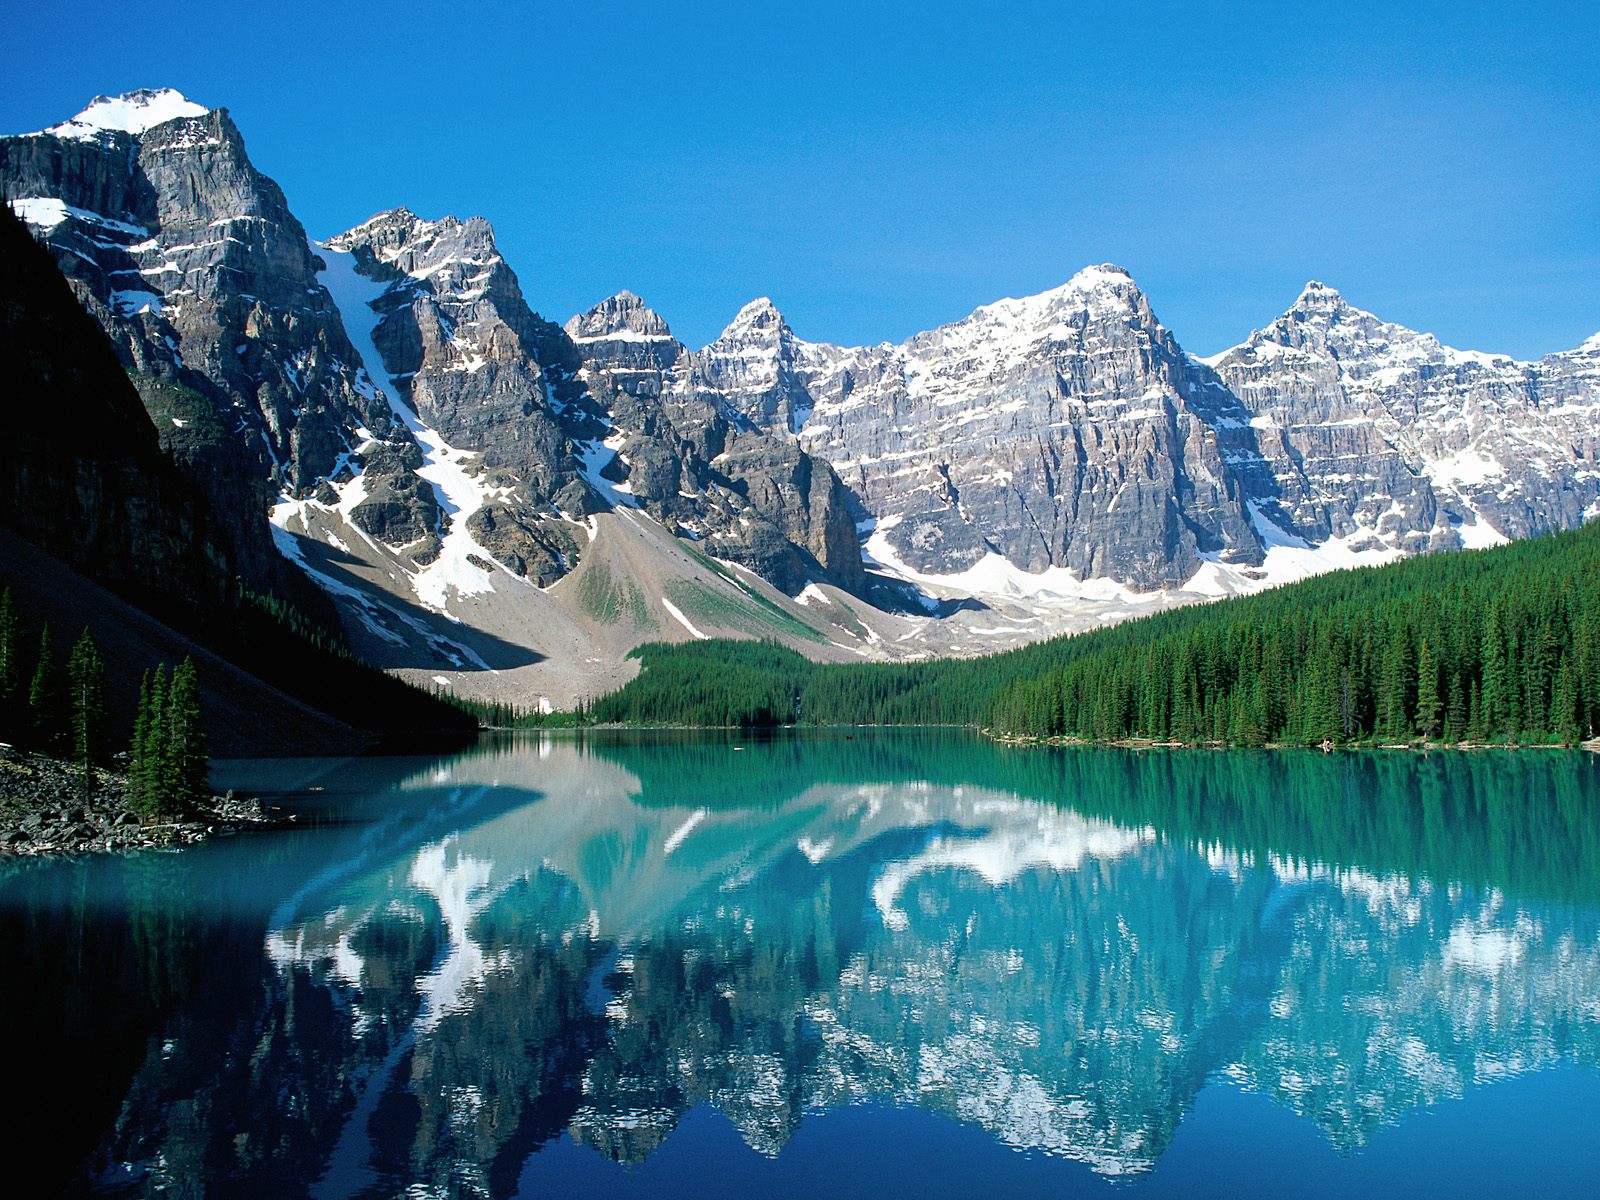 Moraine Lake and Valley of Ten Peaks, Banff National Park, Canada HD Wallpaper